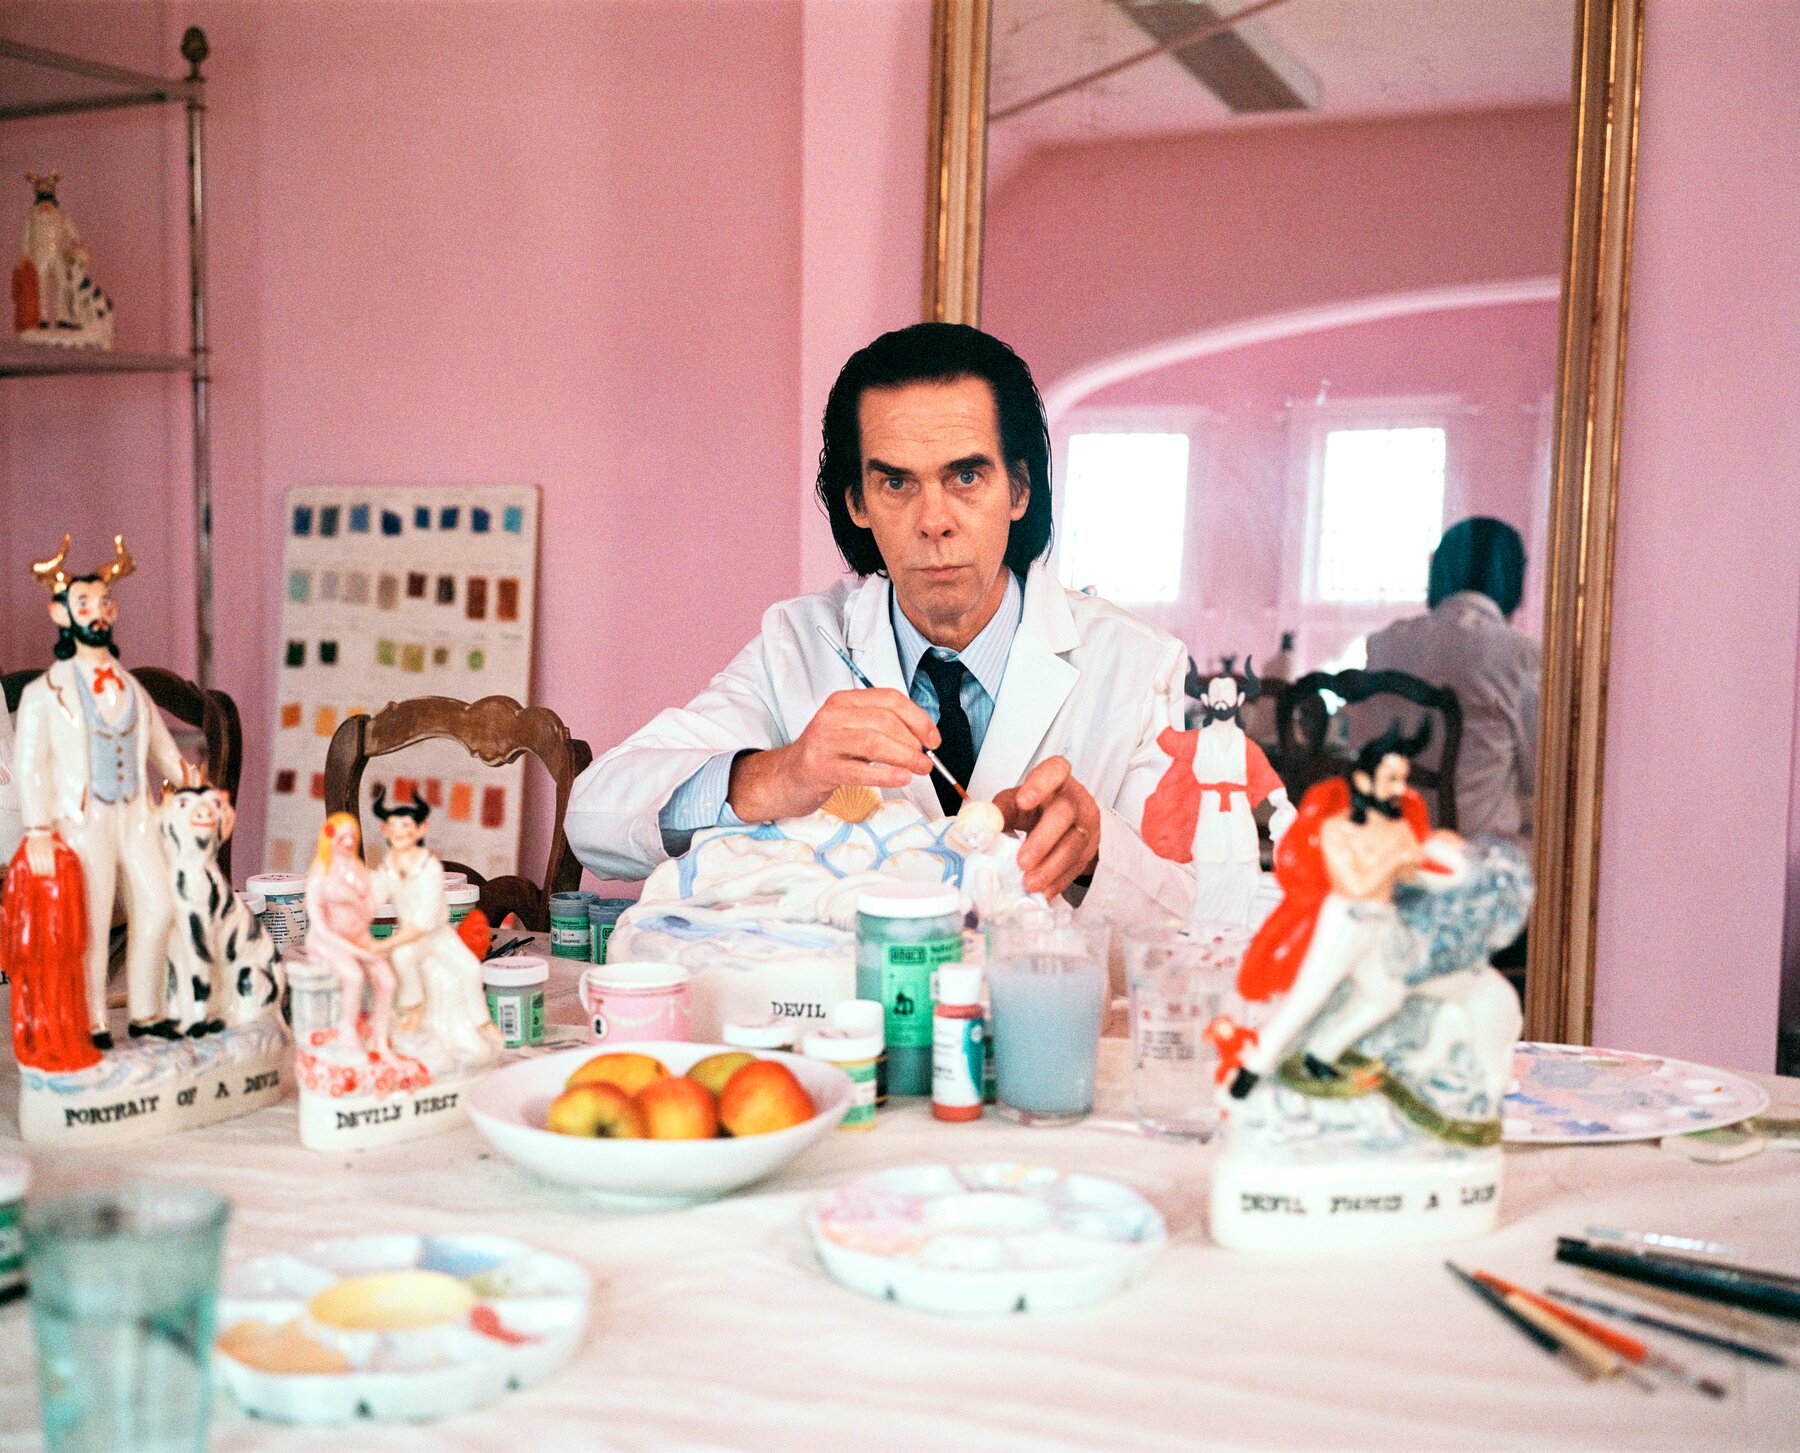 Nick Cave, wearing a shirt, tie and white jacket and sitting in a pink room in front of a tall mirror, holds a paint brush above a porcelain figure. In front of him, on the table, are paint palates, a bowl of fruit and various sculptures.